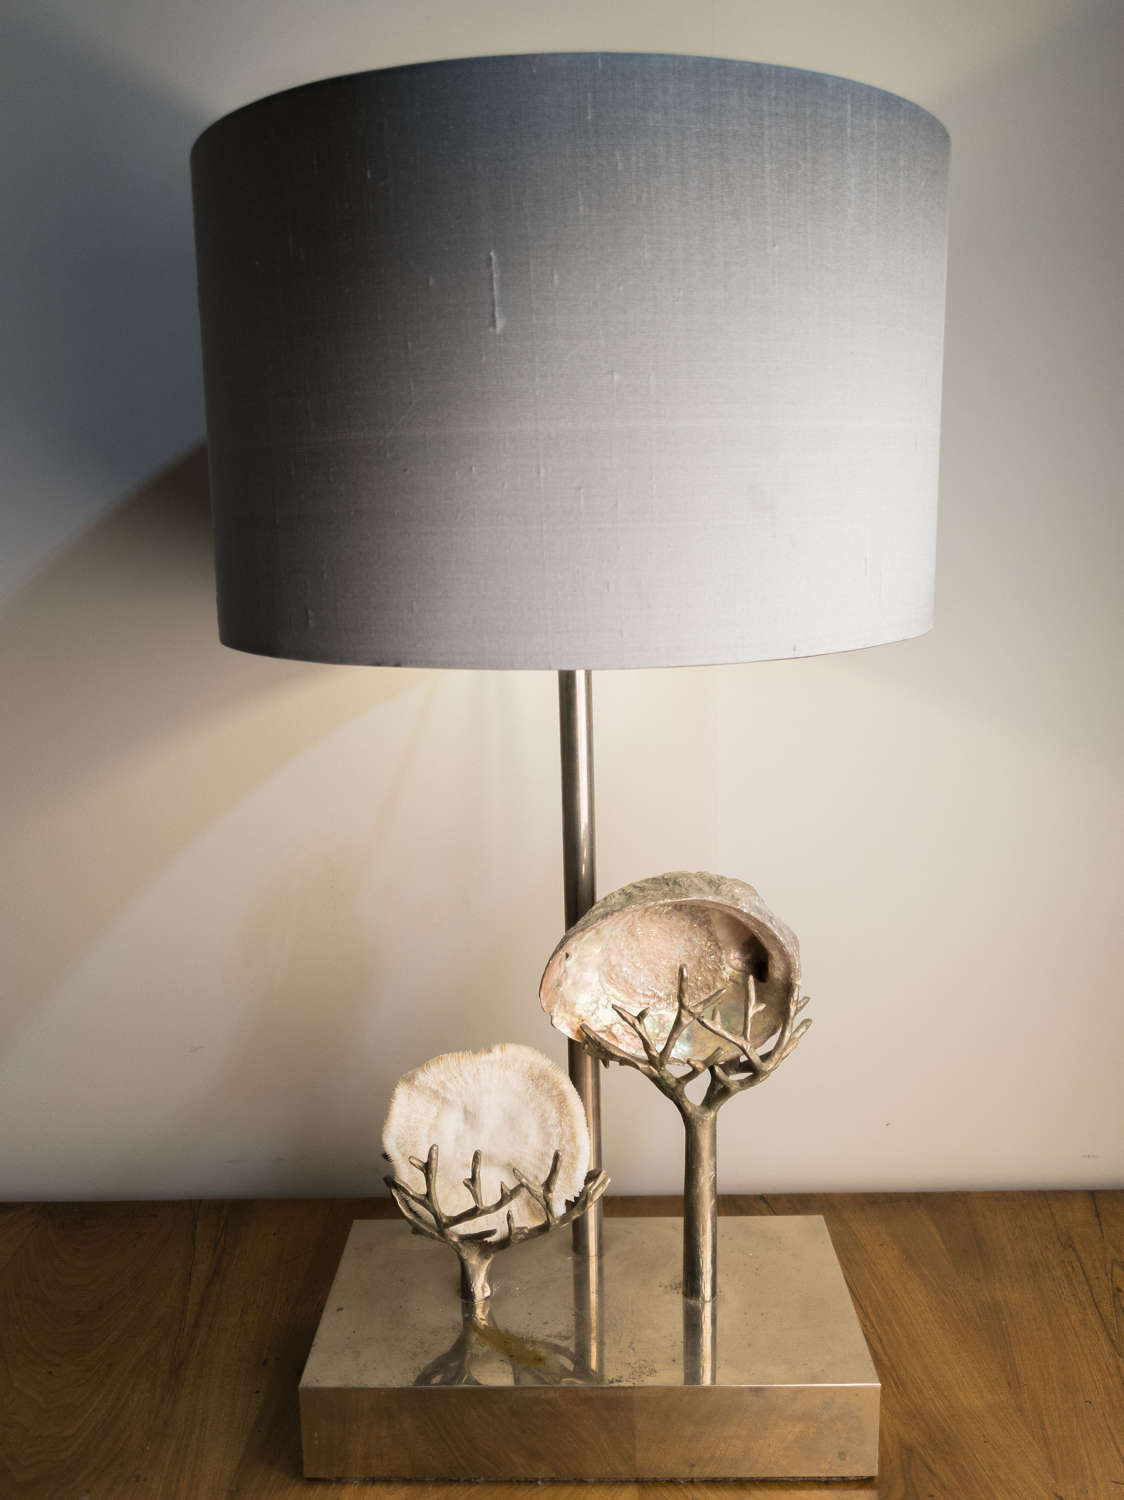 Circa 1930 A Nickel Plated Table Lamp